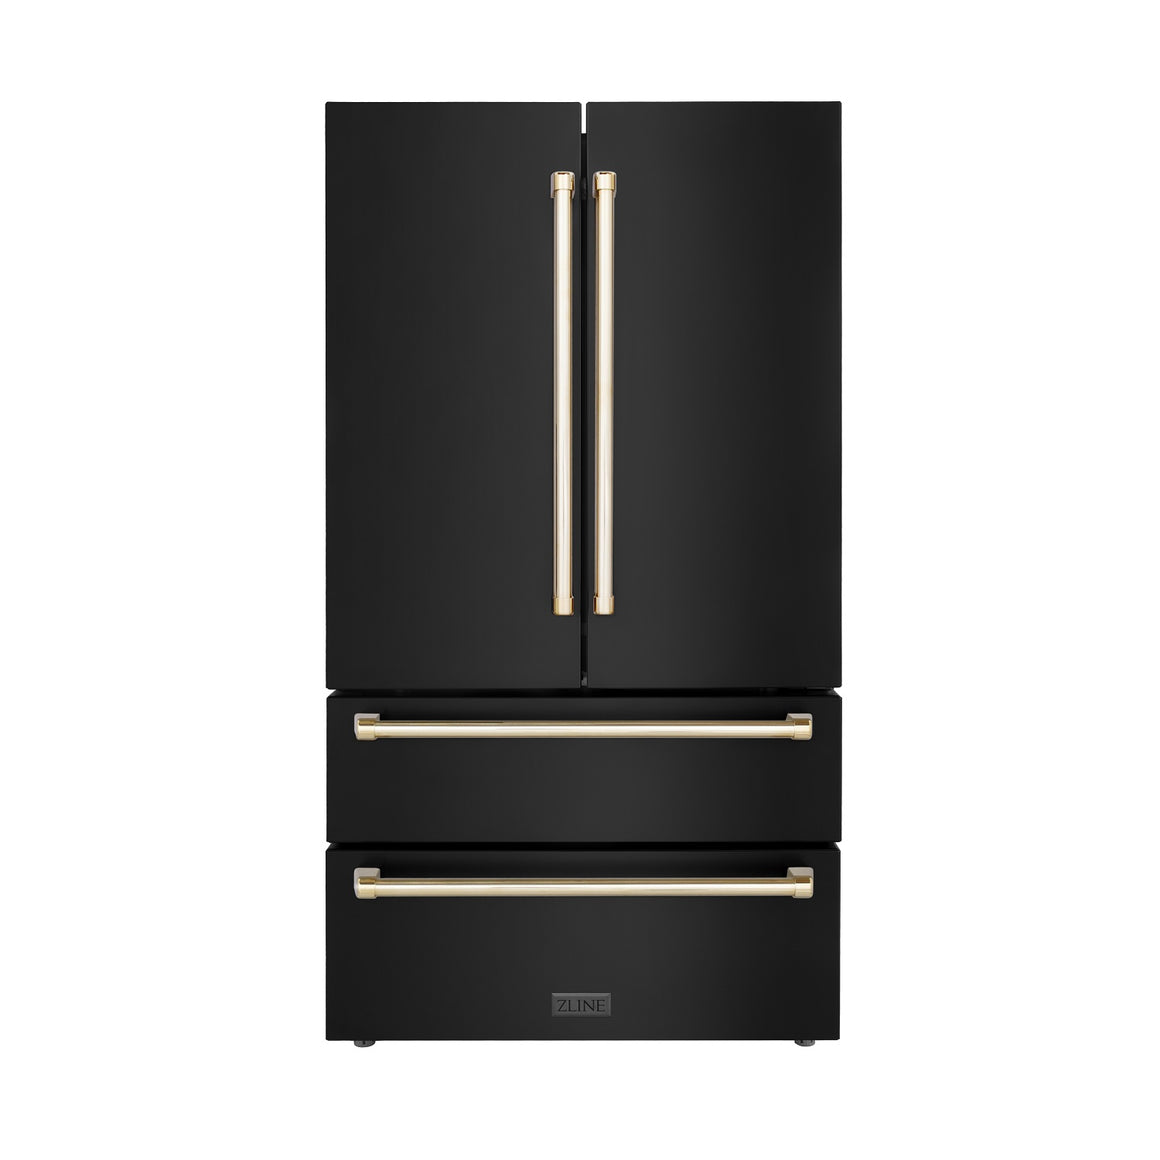 ZLINE 36" Autograph Edition 22.5 cu. ft Freestanding French Door Refrigerator with Ice Maker in Black Stainless Steel with Gold Accents